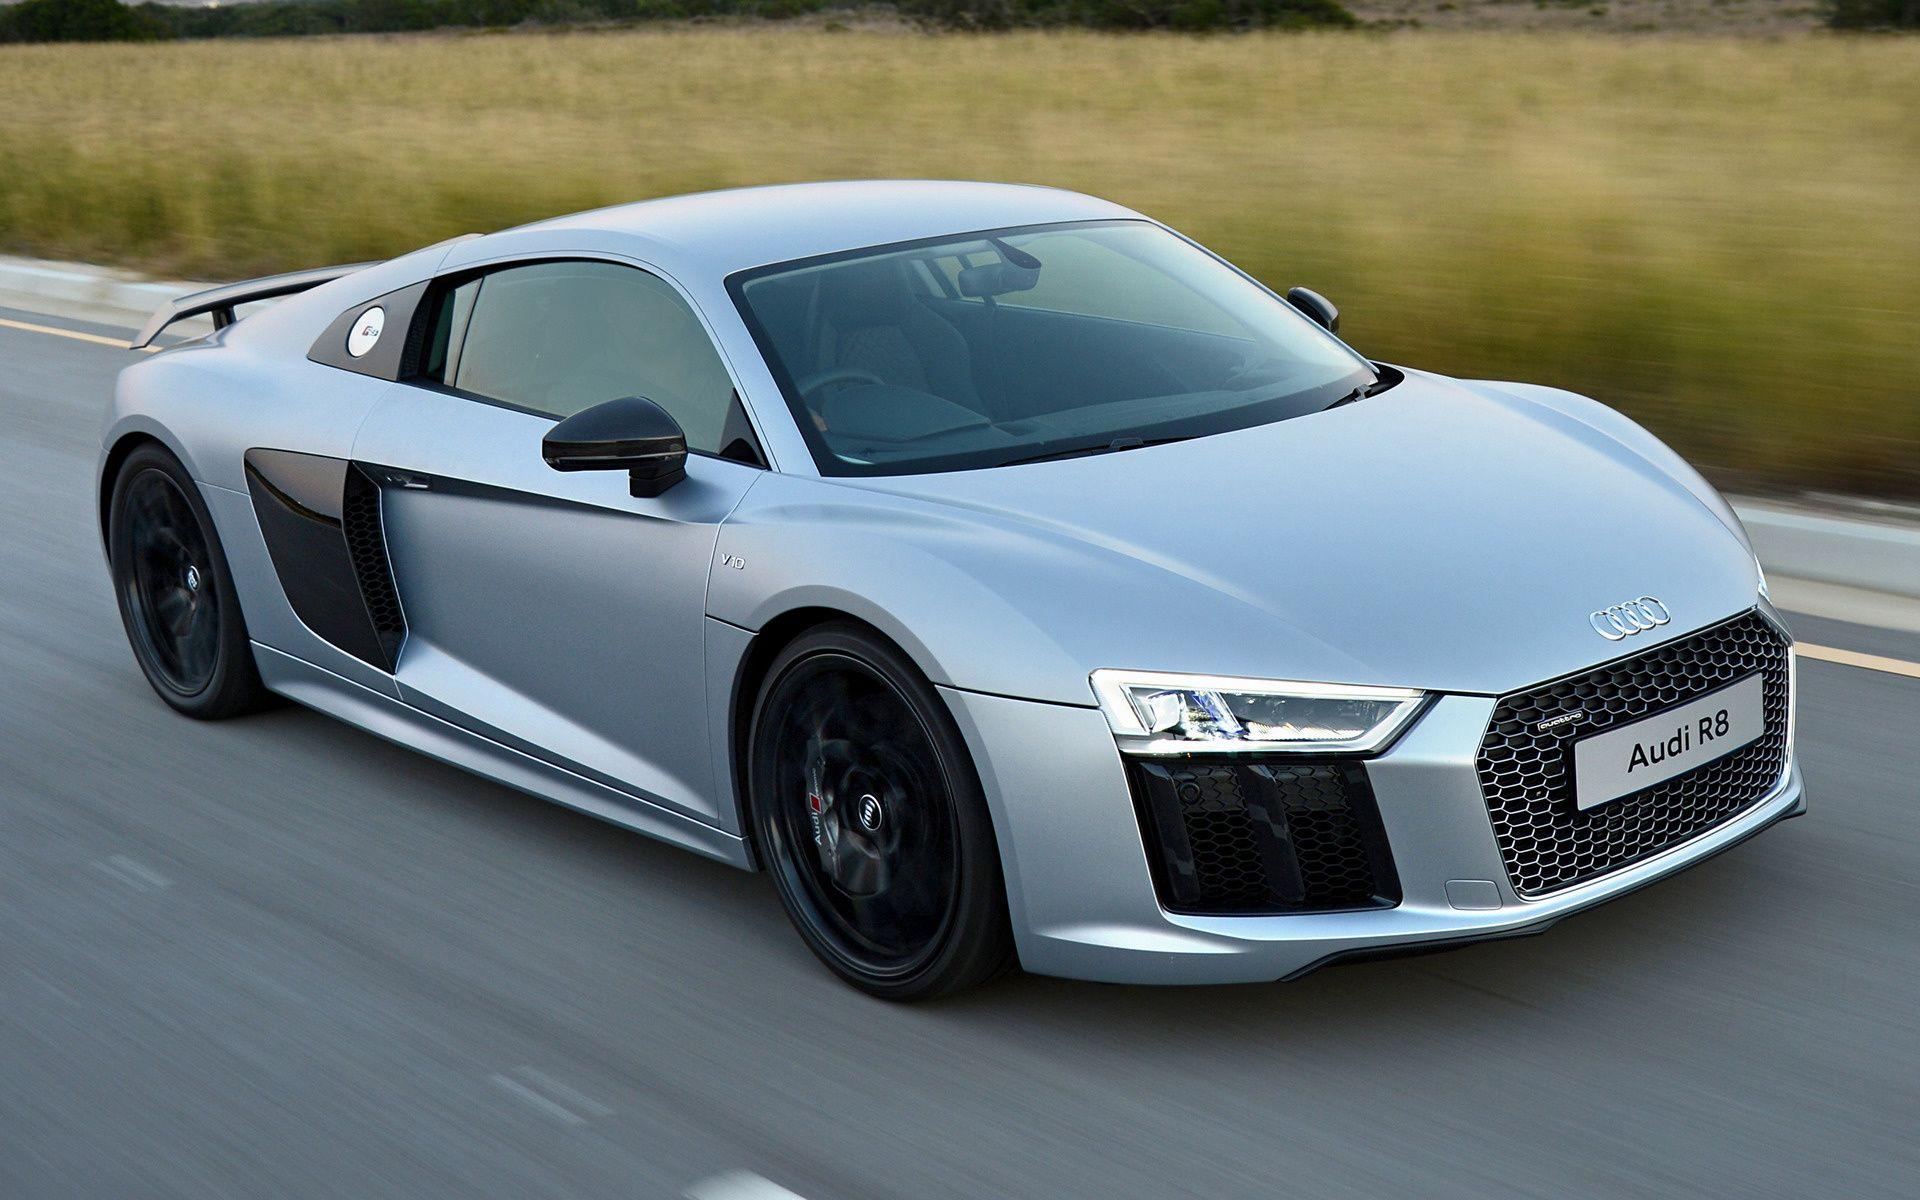 2016 Audi R8 Wallpapers Top Free 2016 Audi R8 Backgrounds